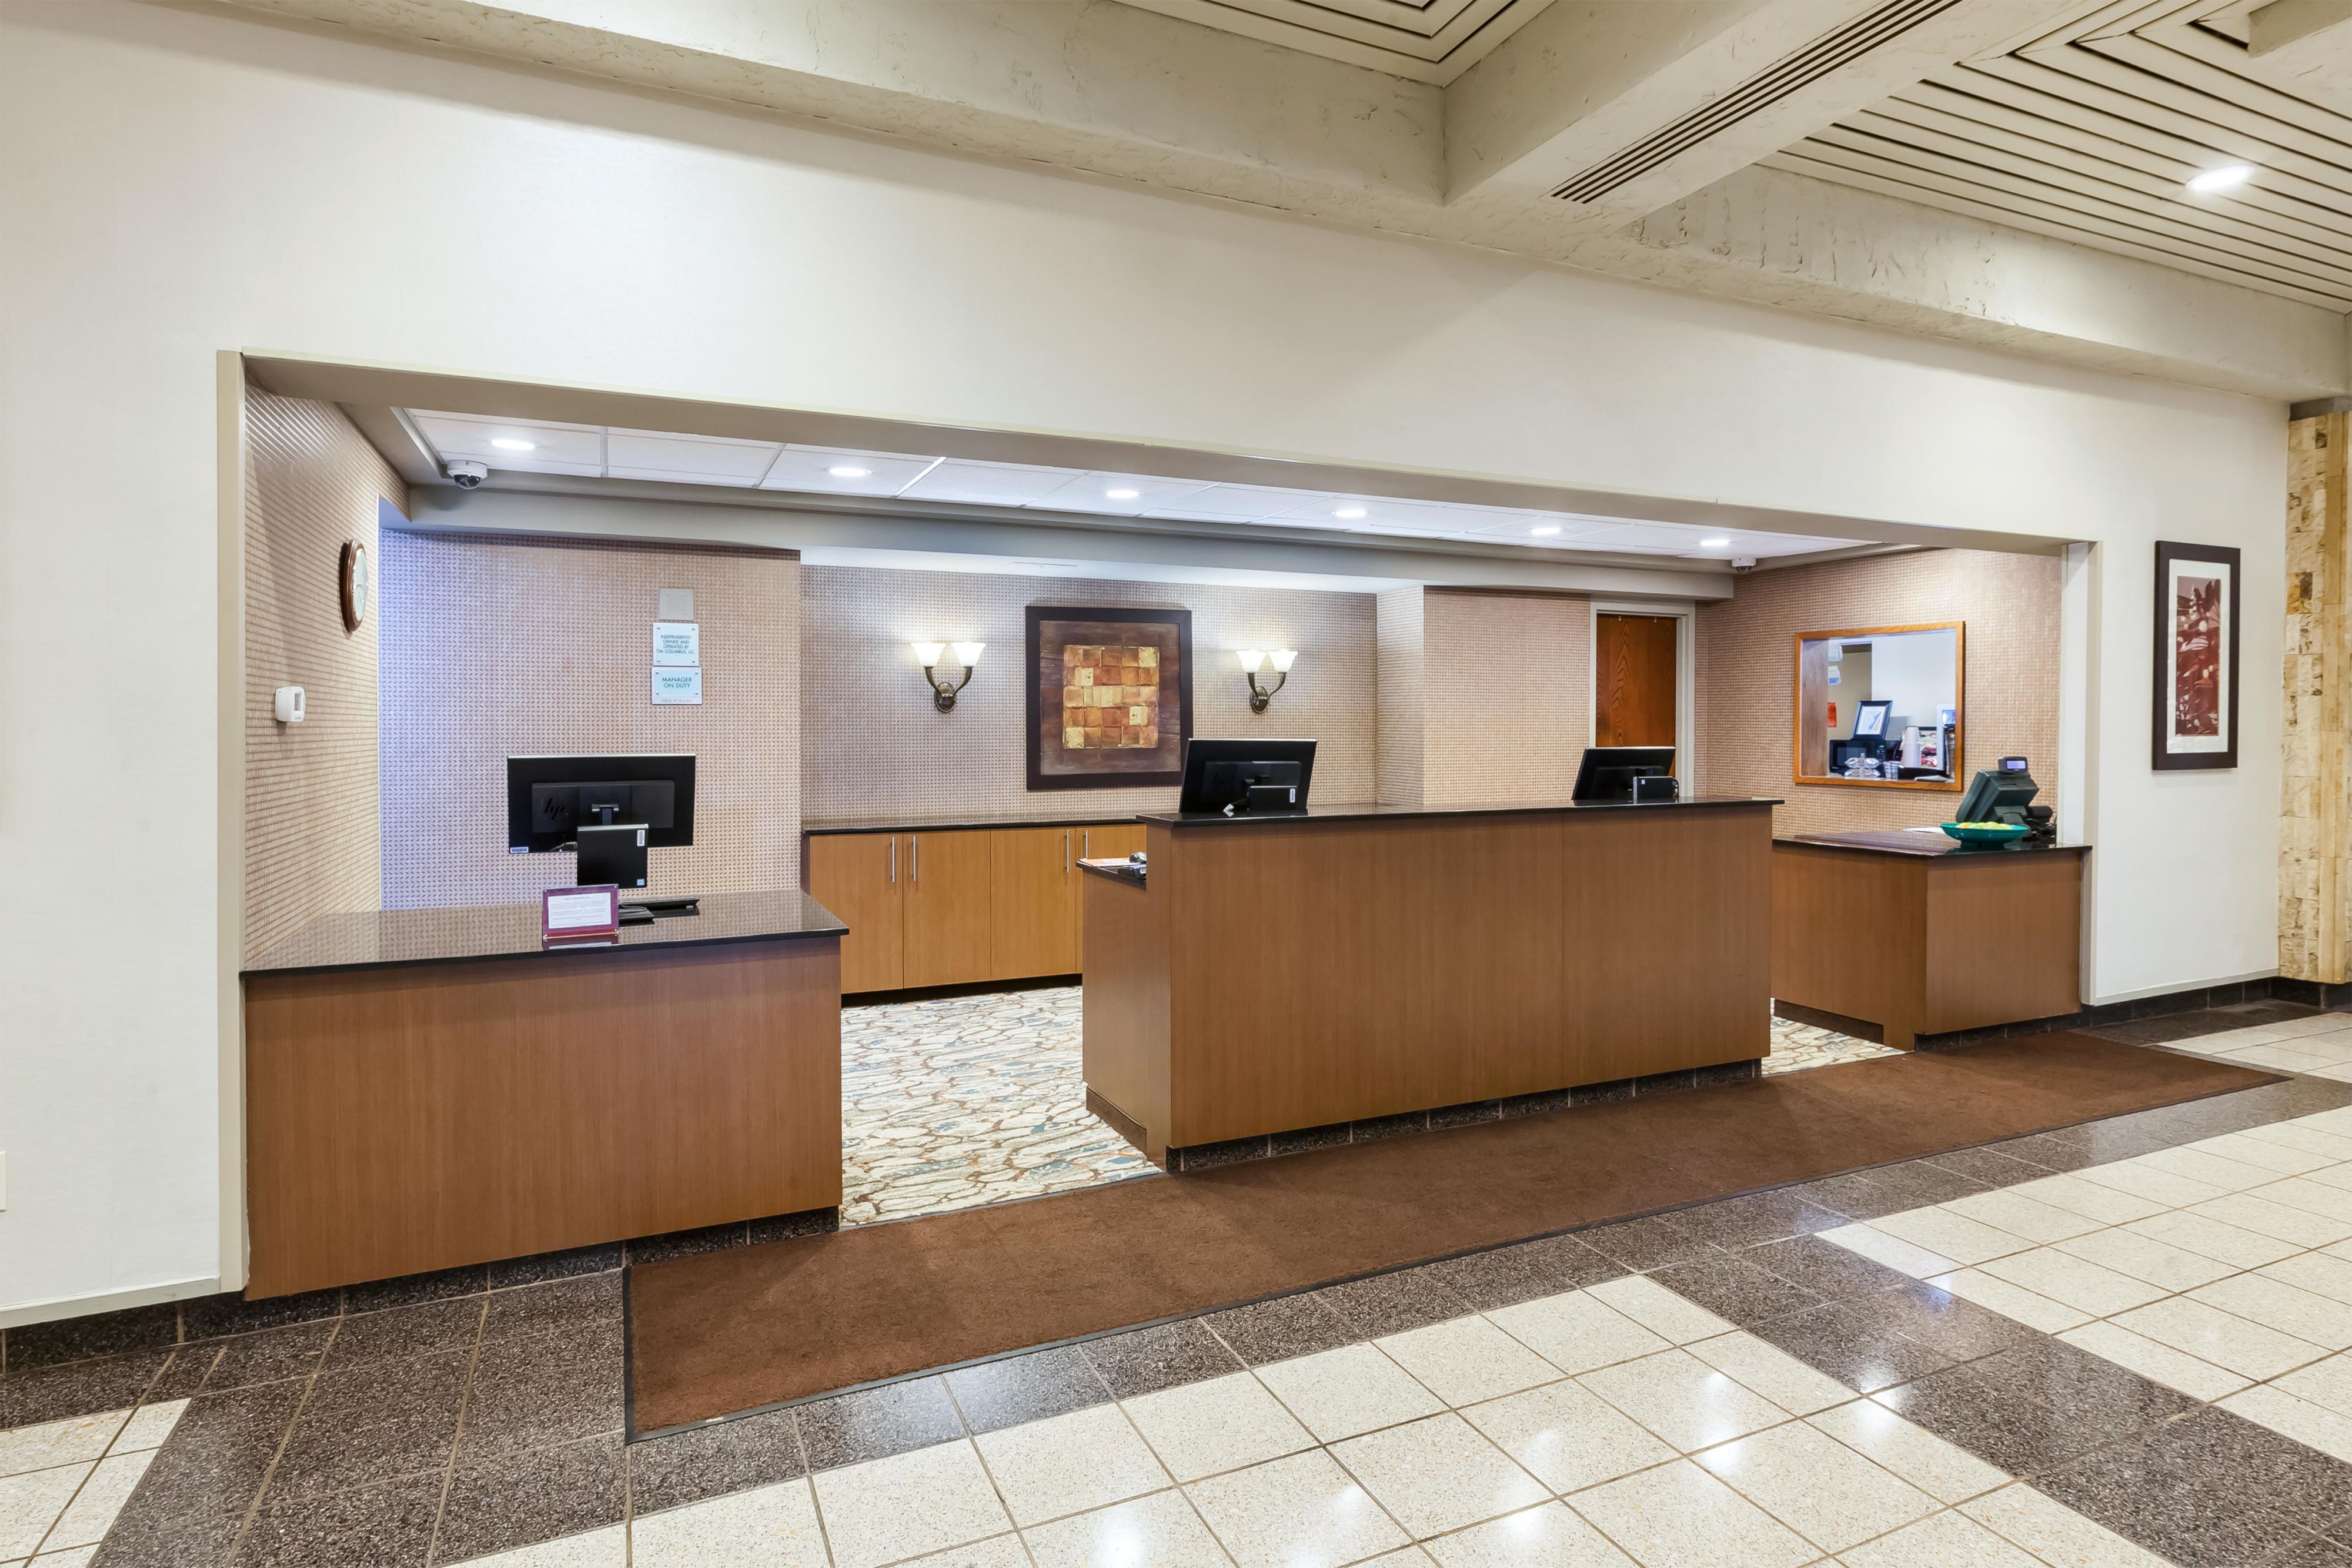 Welcome to the Crowne Plaza Columbus North Worthington